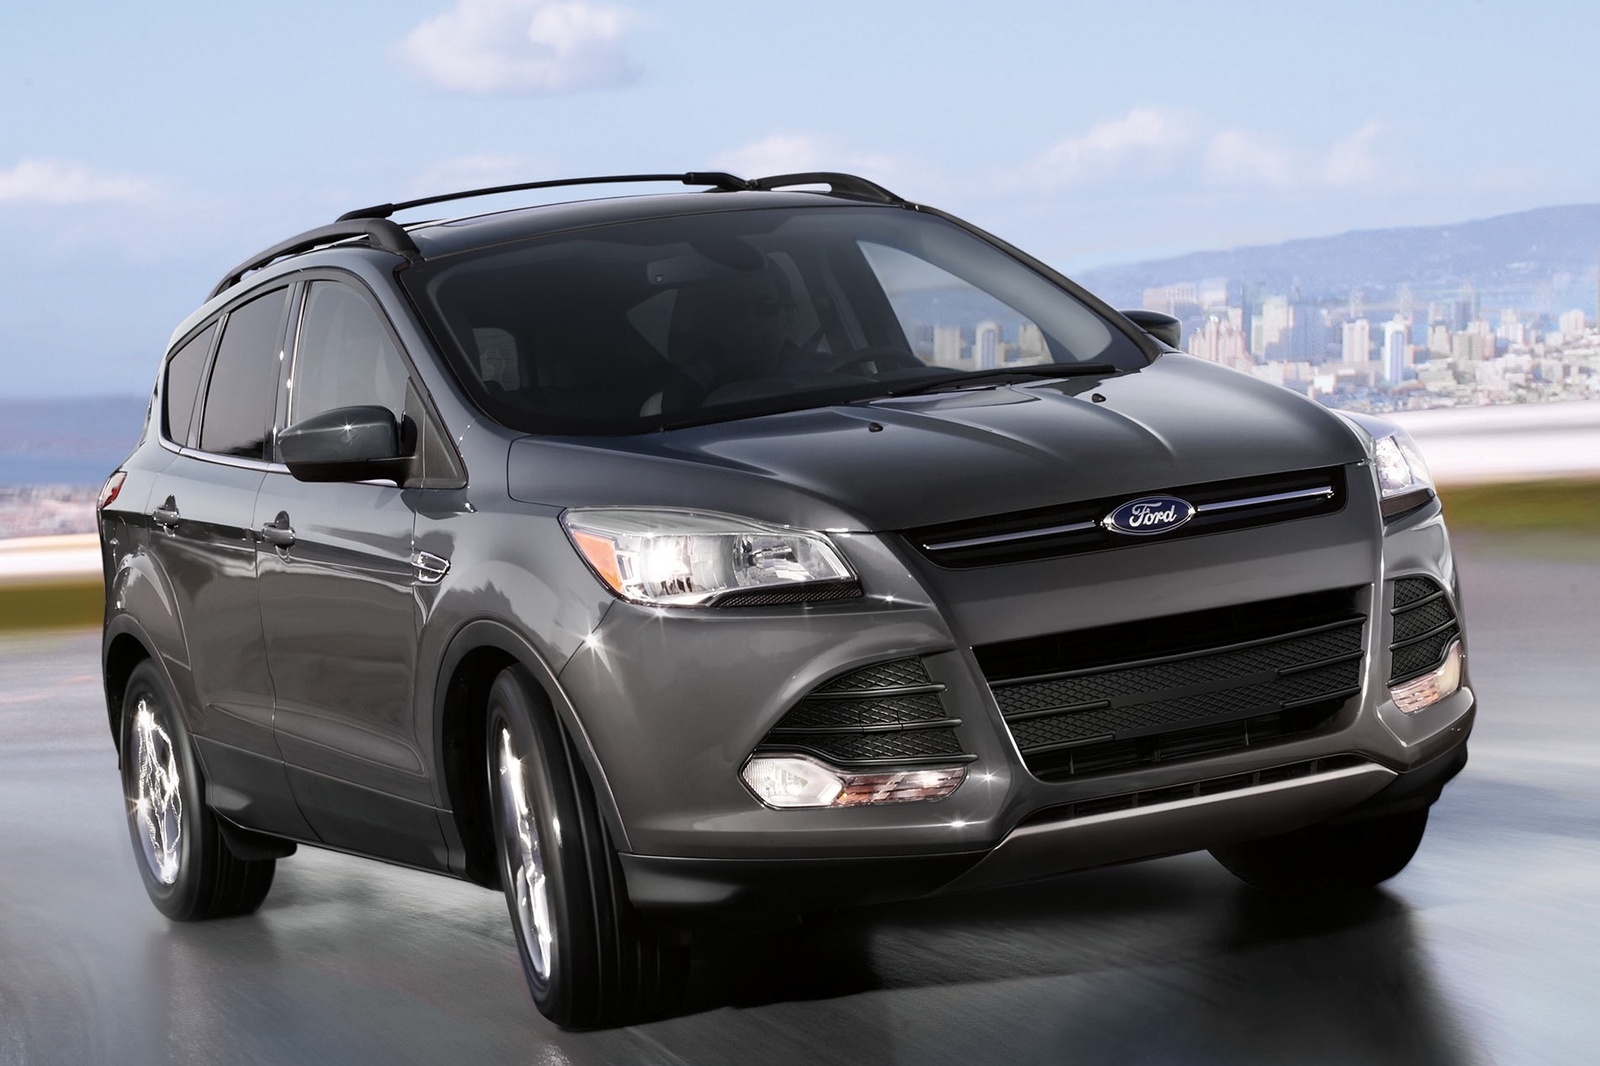 2015 Ford Escape: Prices, Reviews & Pictures - CarGurus